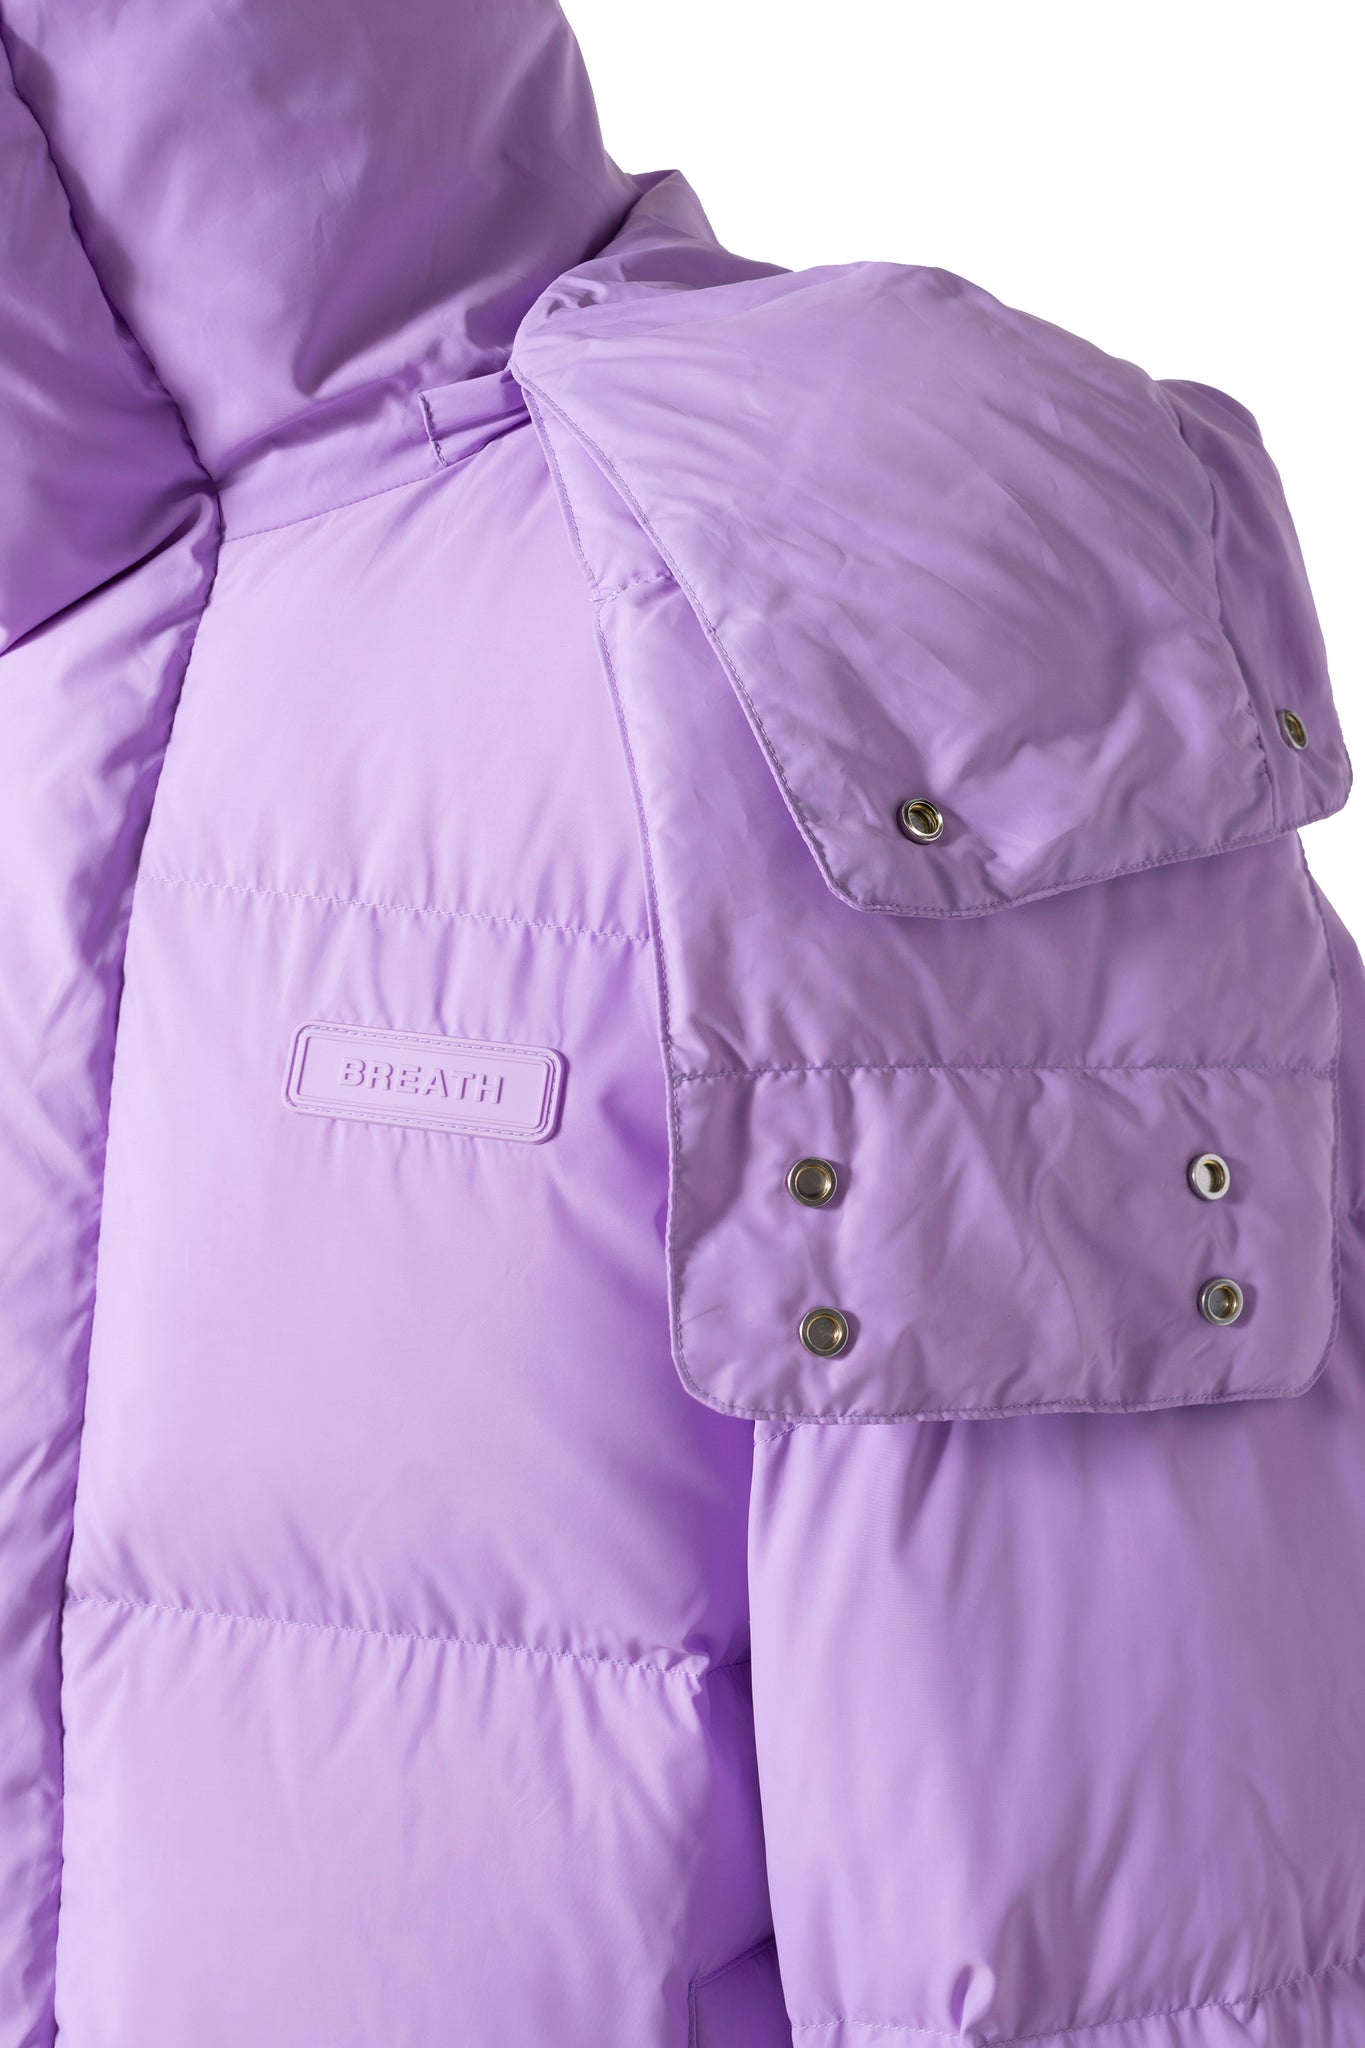 OVER SIZE DOWN JACKET / PUR